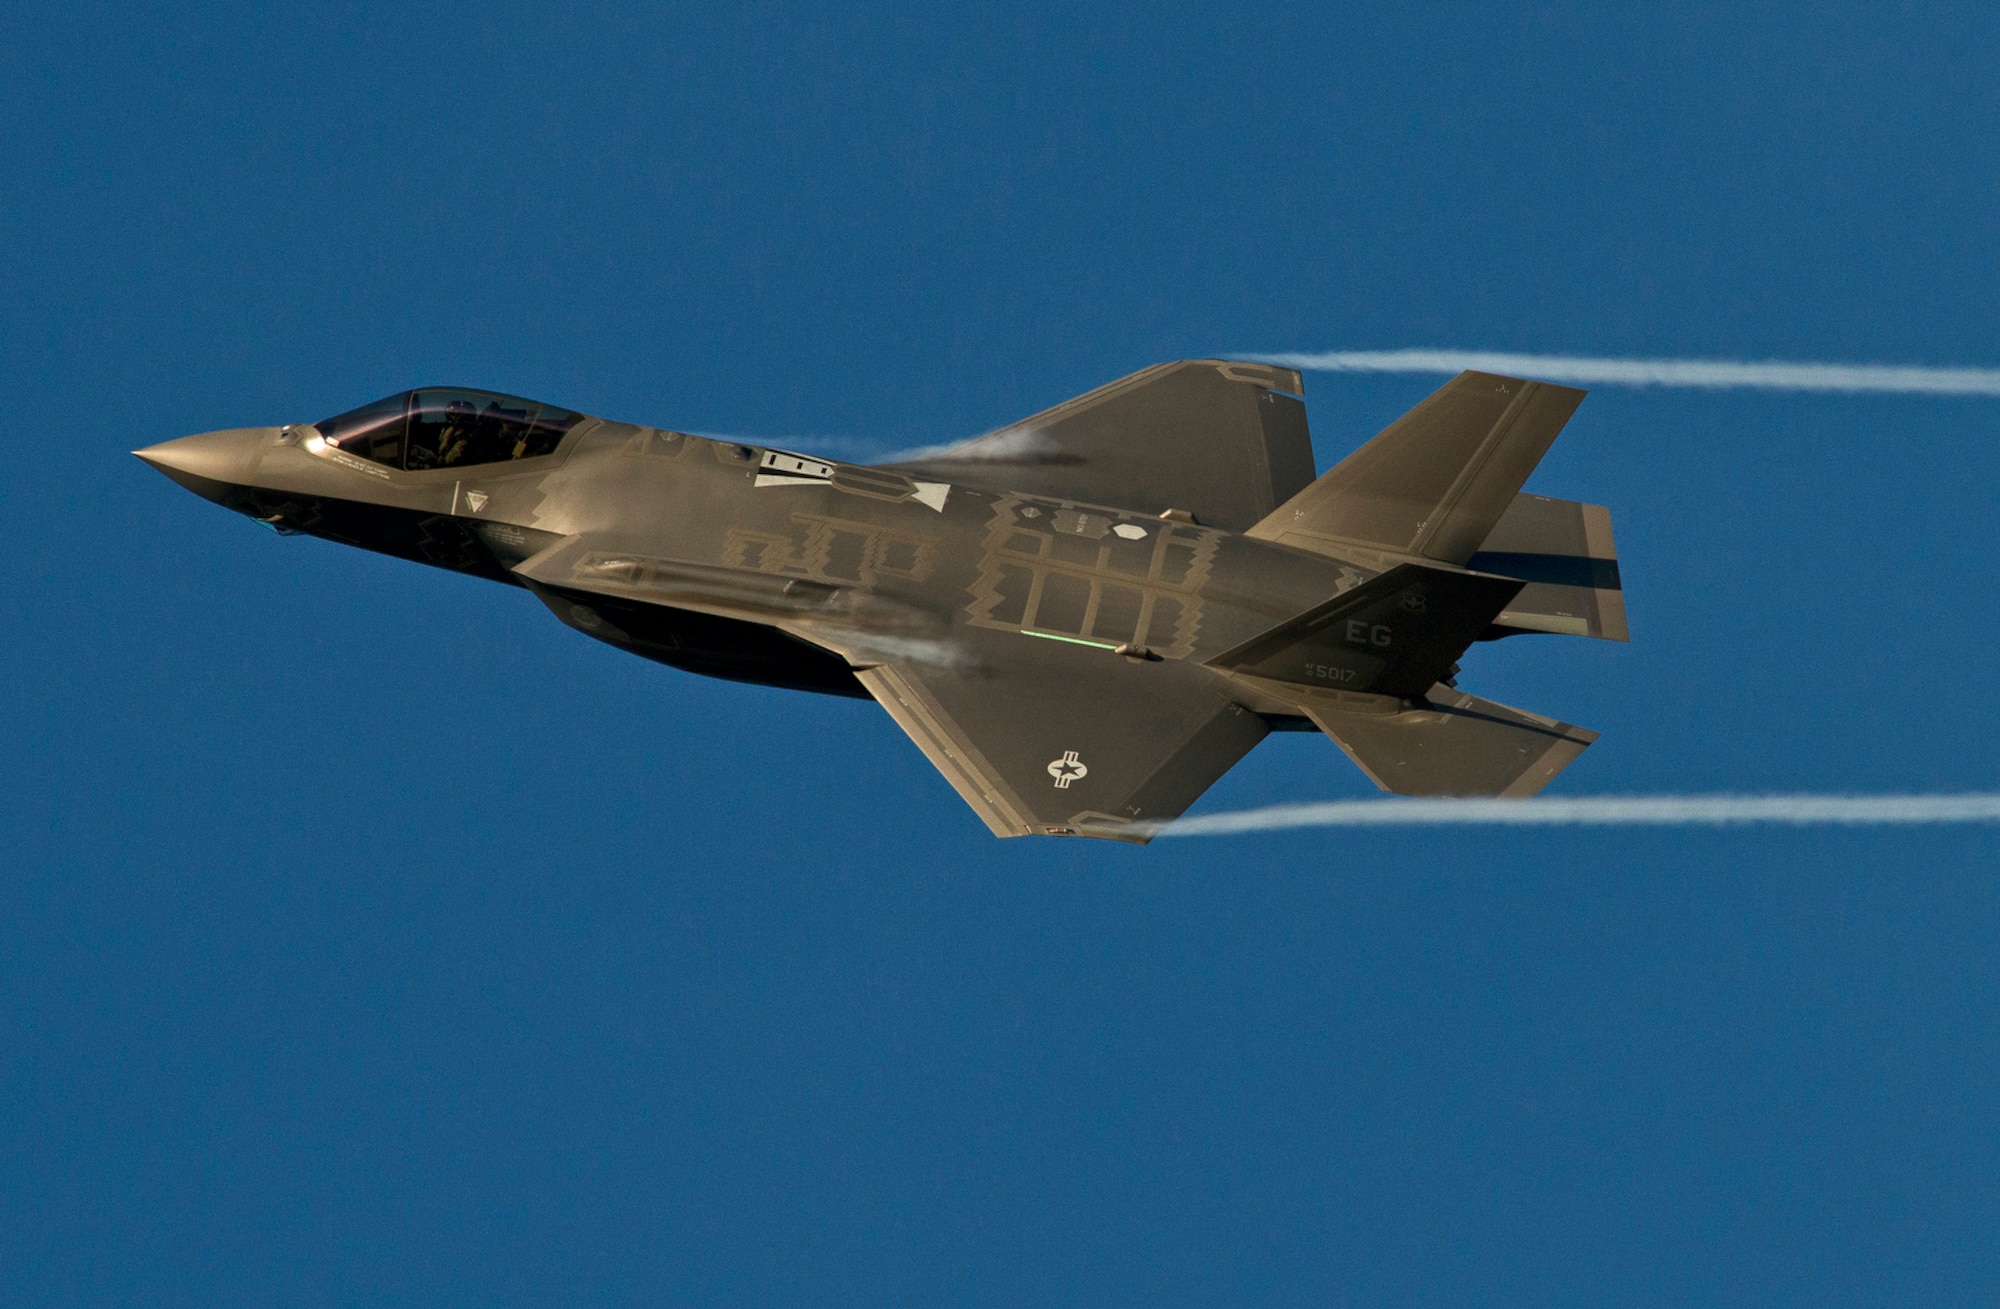 An F-35A Lightning II from the 33rd Fighter Wing streaks across the sky above Eglin Air Force Base, Fla. while coming in for landing after a training sortie. The 33rd Fighter Wing is responsible for F-35 A/B/C Lightning II pilot and maintainer training for the Marine Corps, the Navy, the Air Force and, in the future, at least eight coalition partners. Initially, 59 aircraft and three flying squadrons, one for each service/aircraft variant, will be established at Eglin. (U.S. Air Force photo/Tech. Sgt. Bennie J. Davis III)